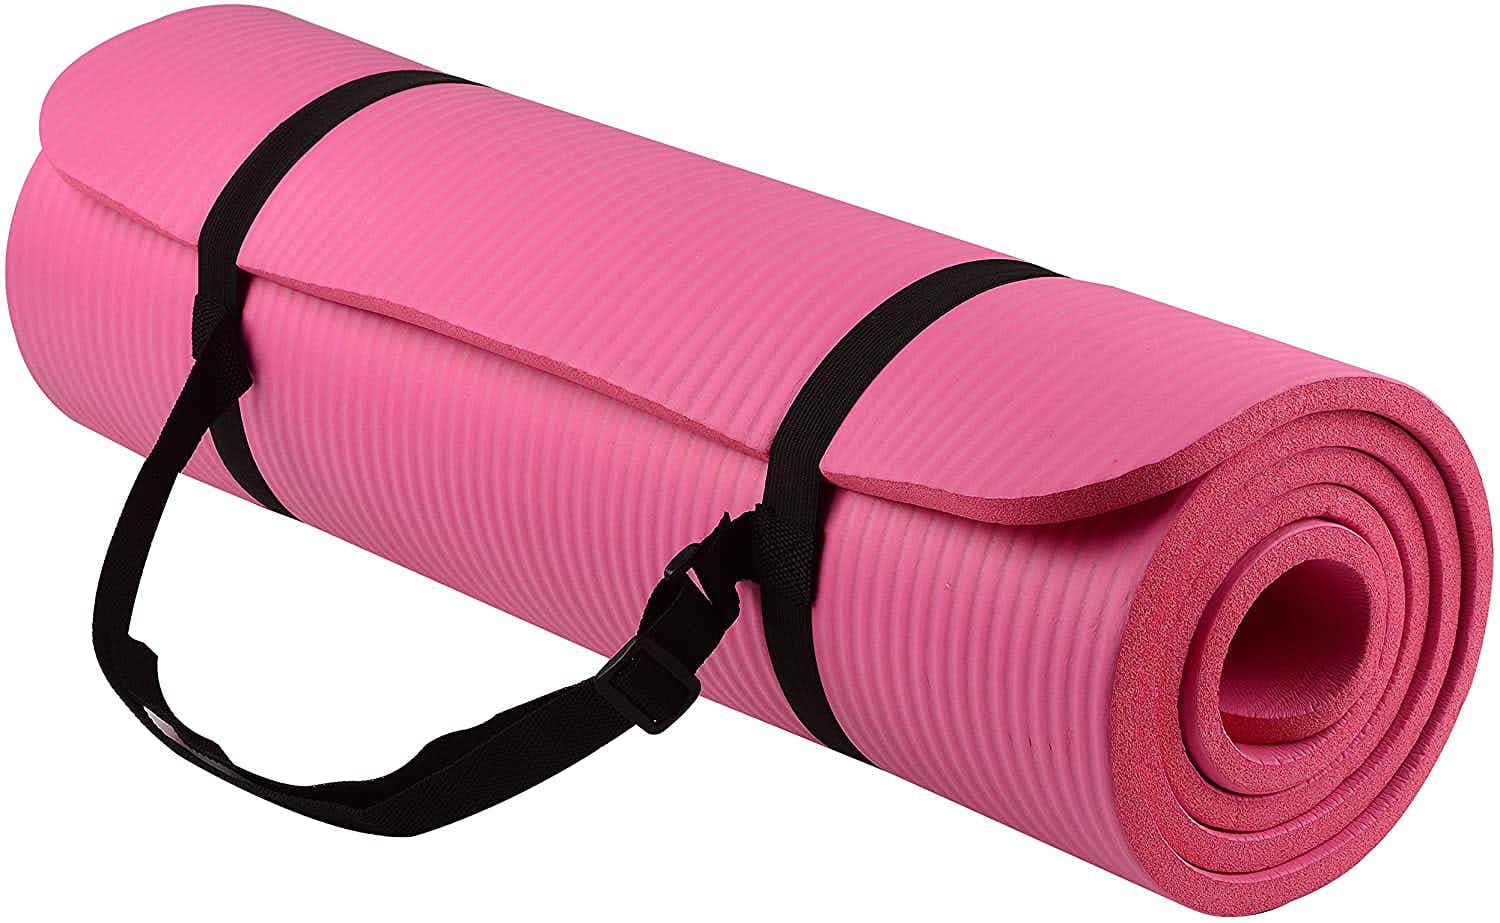 pink Goyoga cheap yoga mat rolled up with black carrying strap for under $30